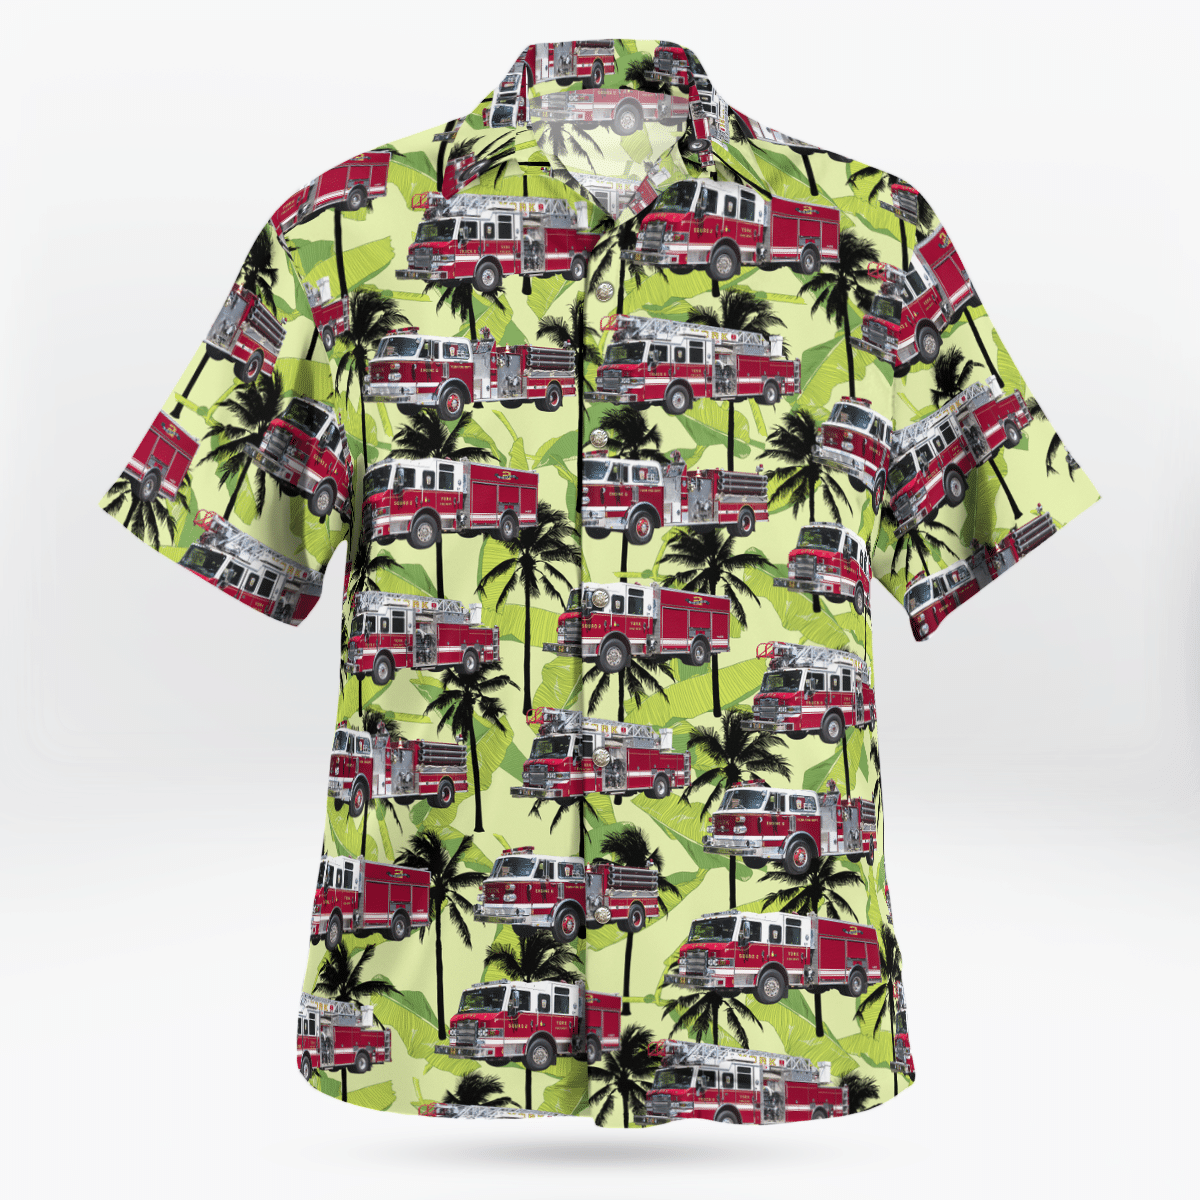 Hawaiian shirts never go out of style 63